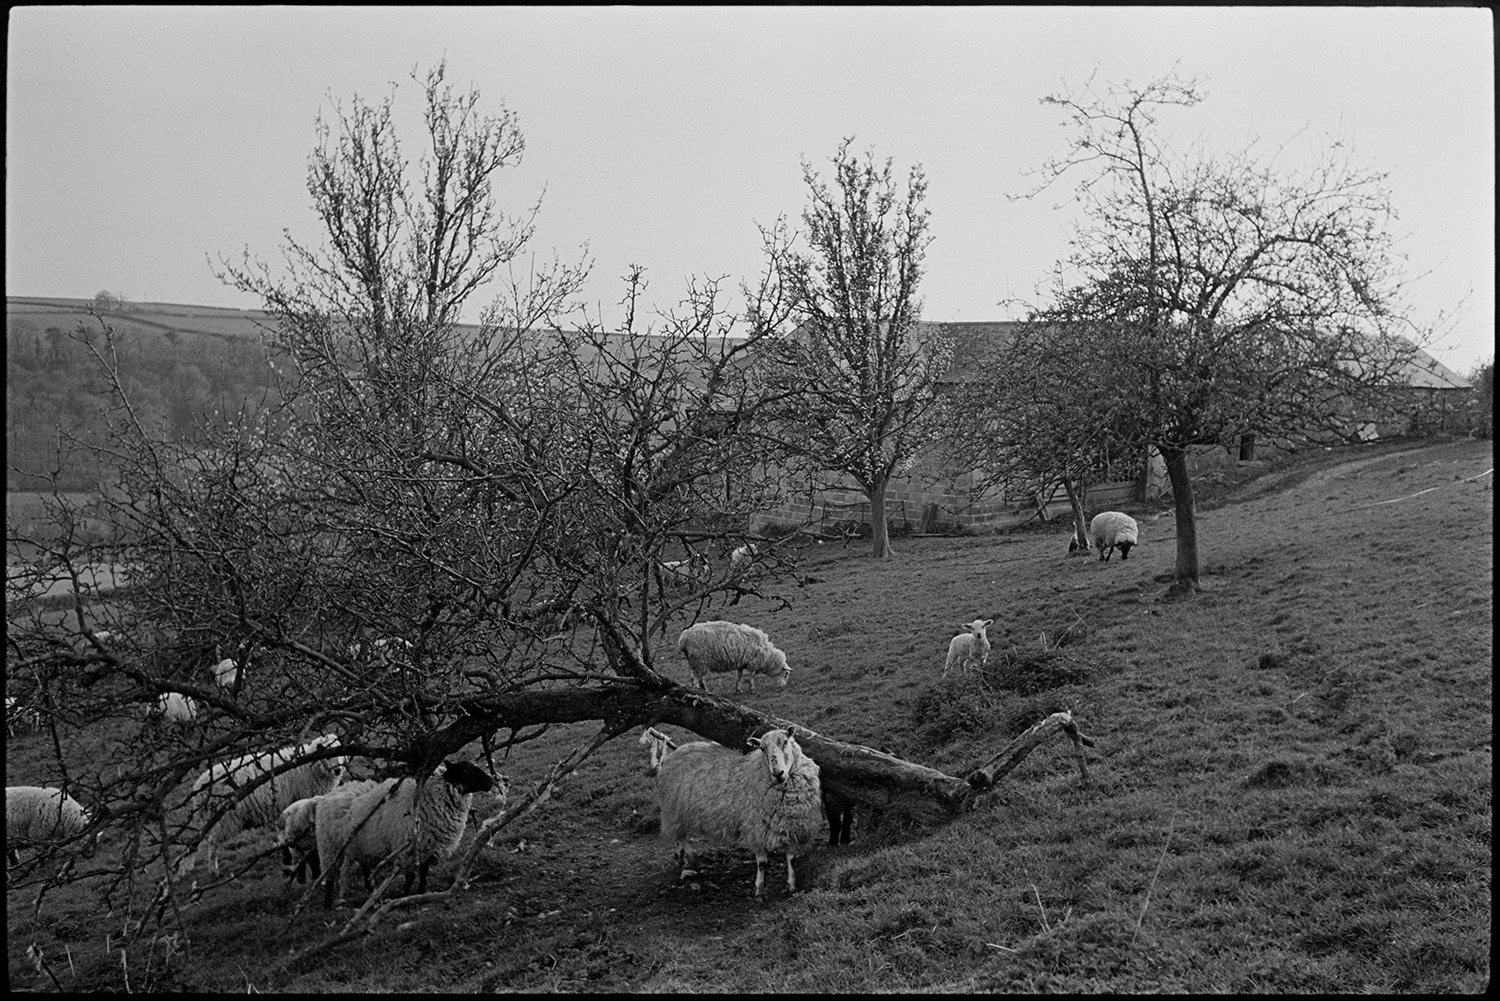 Orchards. Sheep in farm orchard.
[A flock of sheep with lambs grazing in an orchard at Sydham, Chulmleigh.]